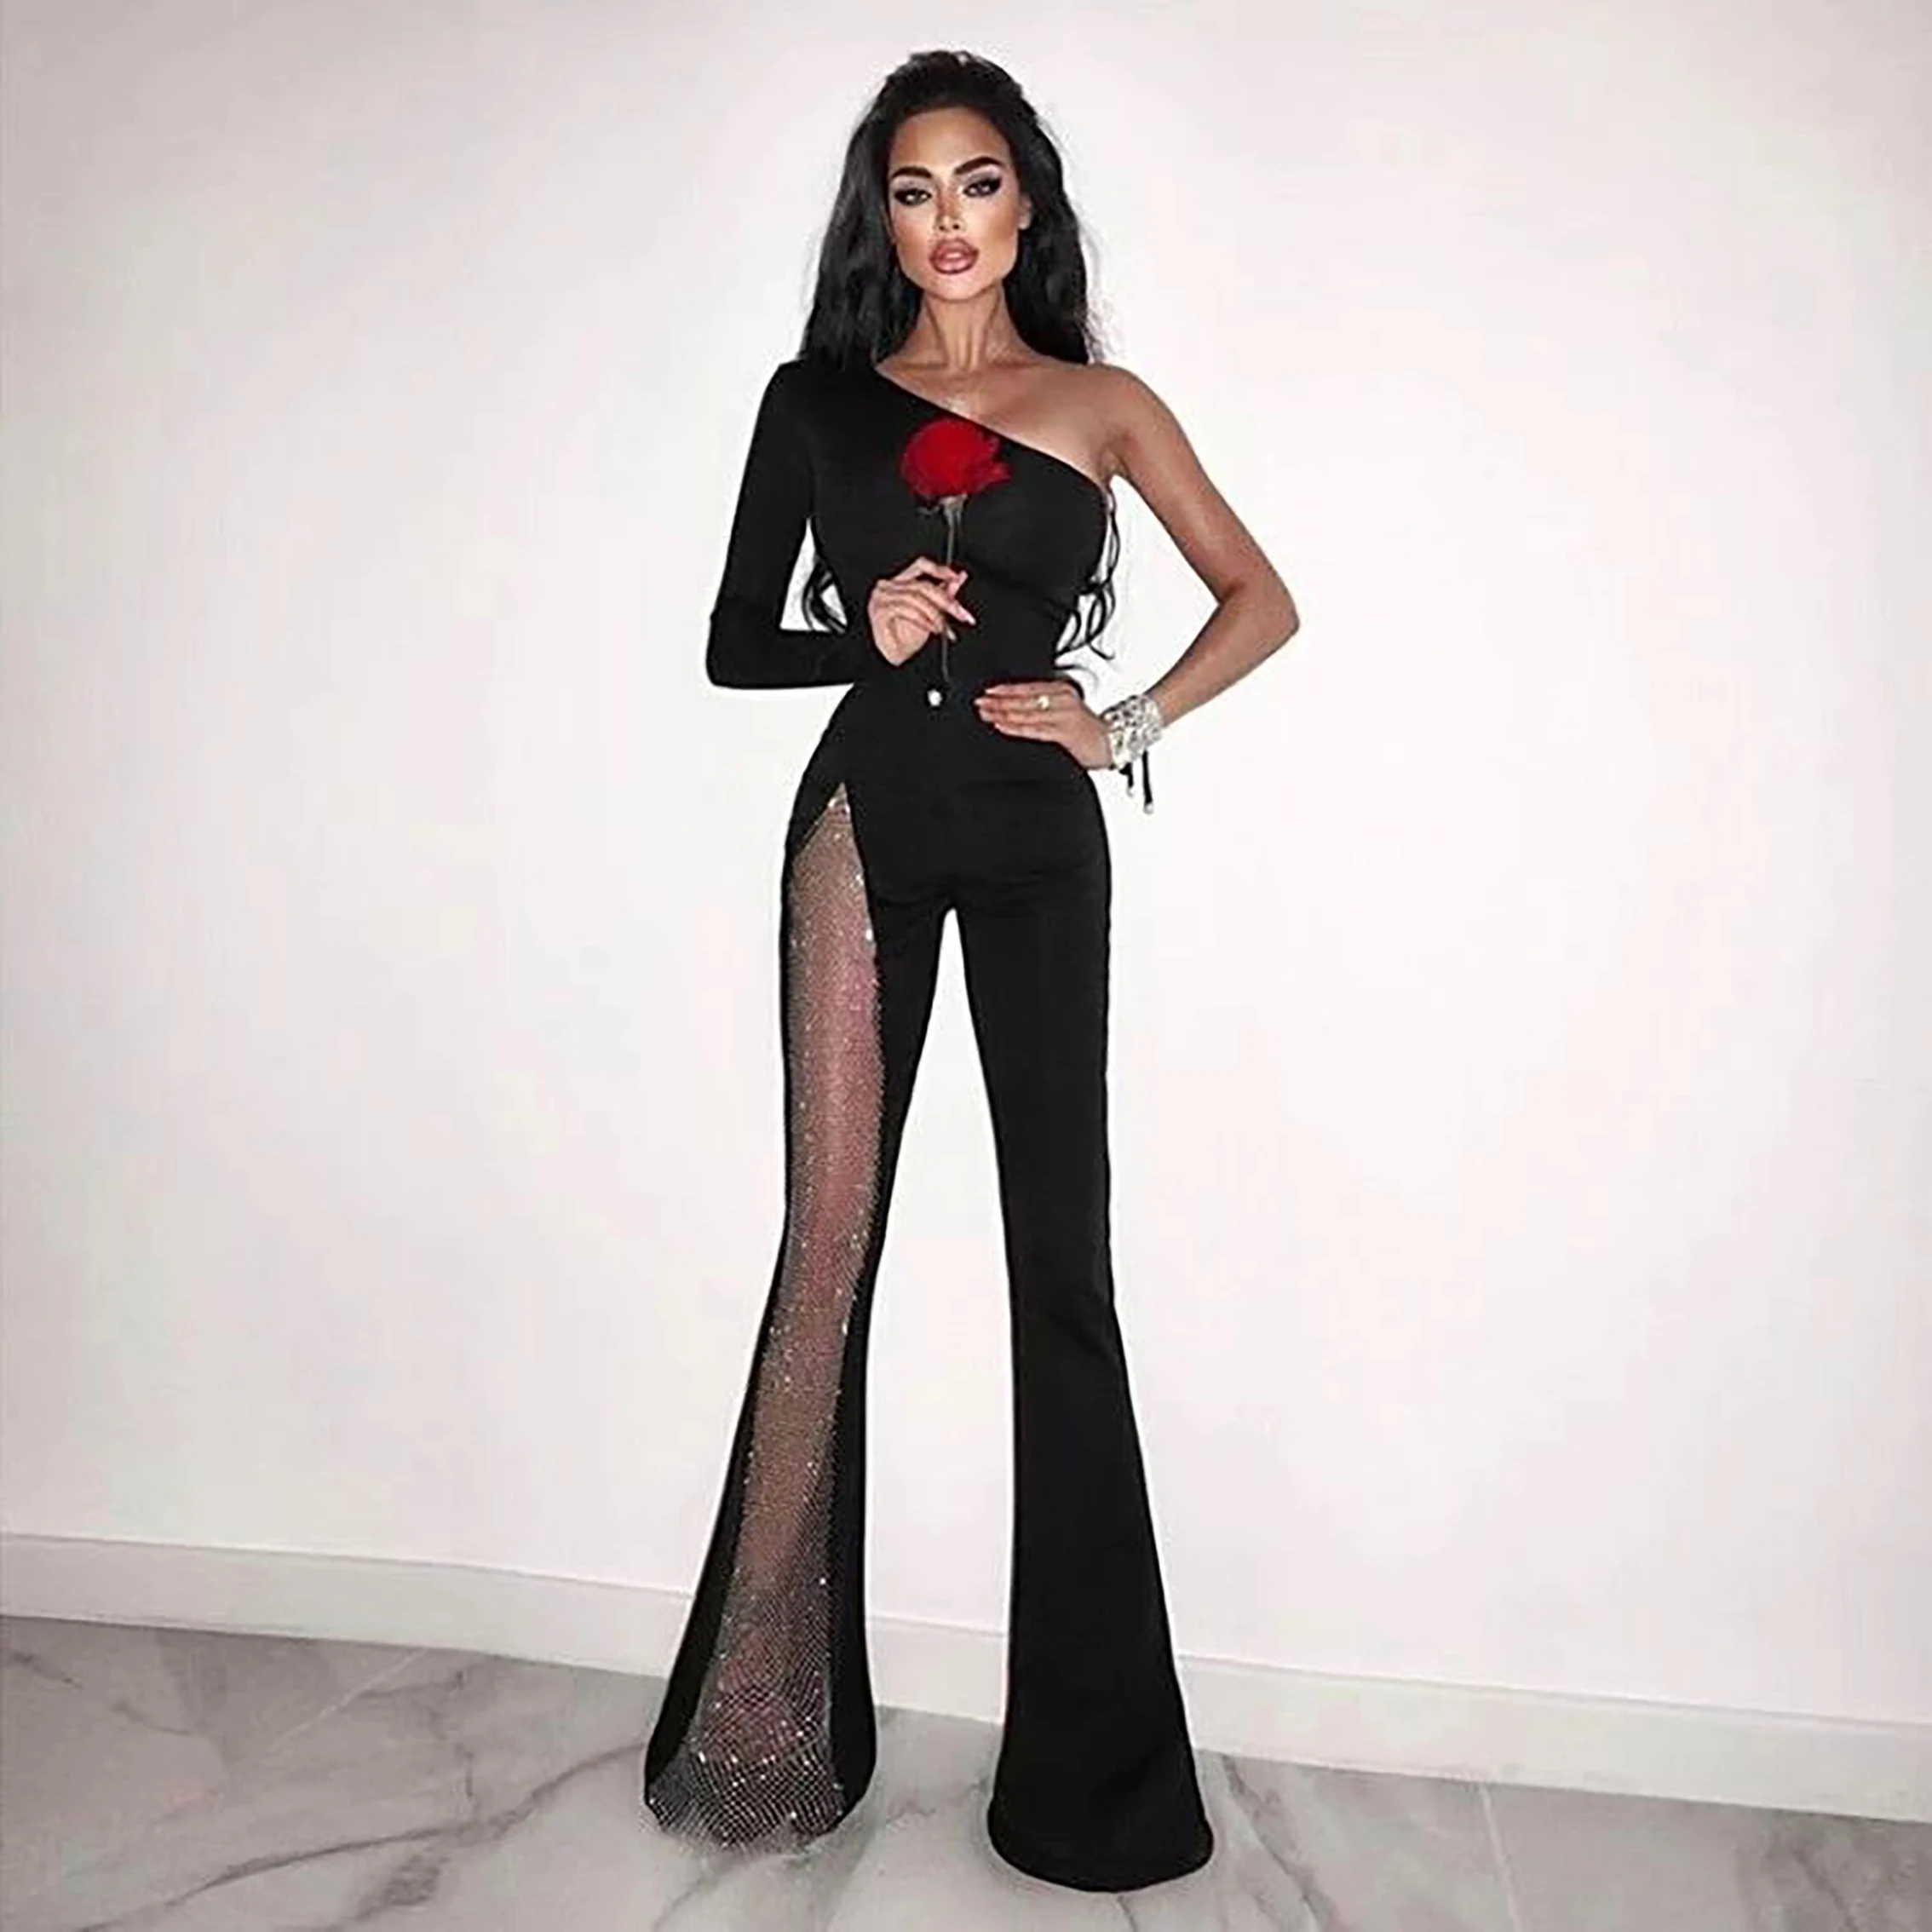 Fashion Sexy Black White One Shoulder Long Sleeve Diamond Bandage Jumpsuit Bodycon Night Club Outfit Women Bodysuit Playsuits